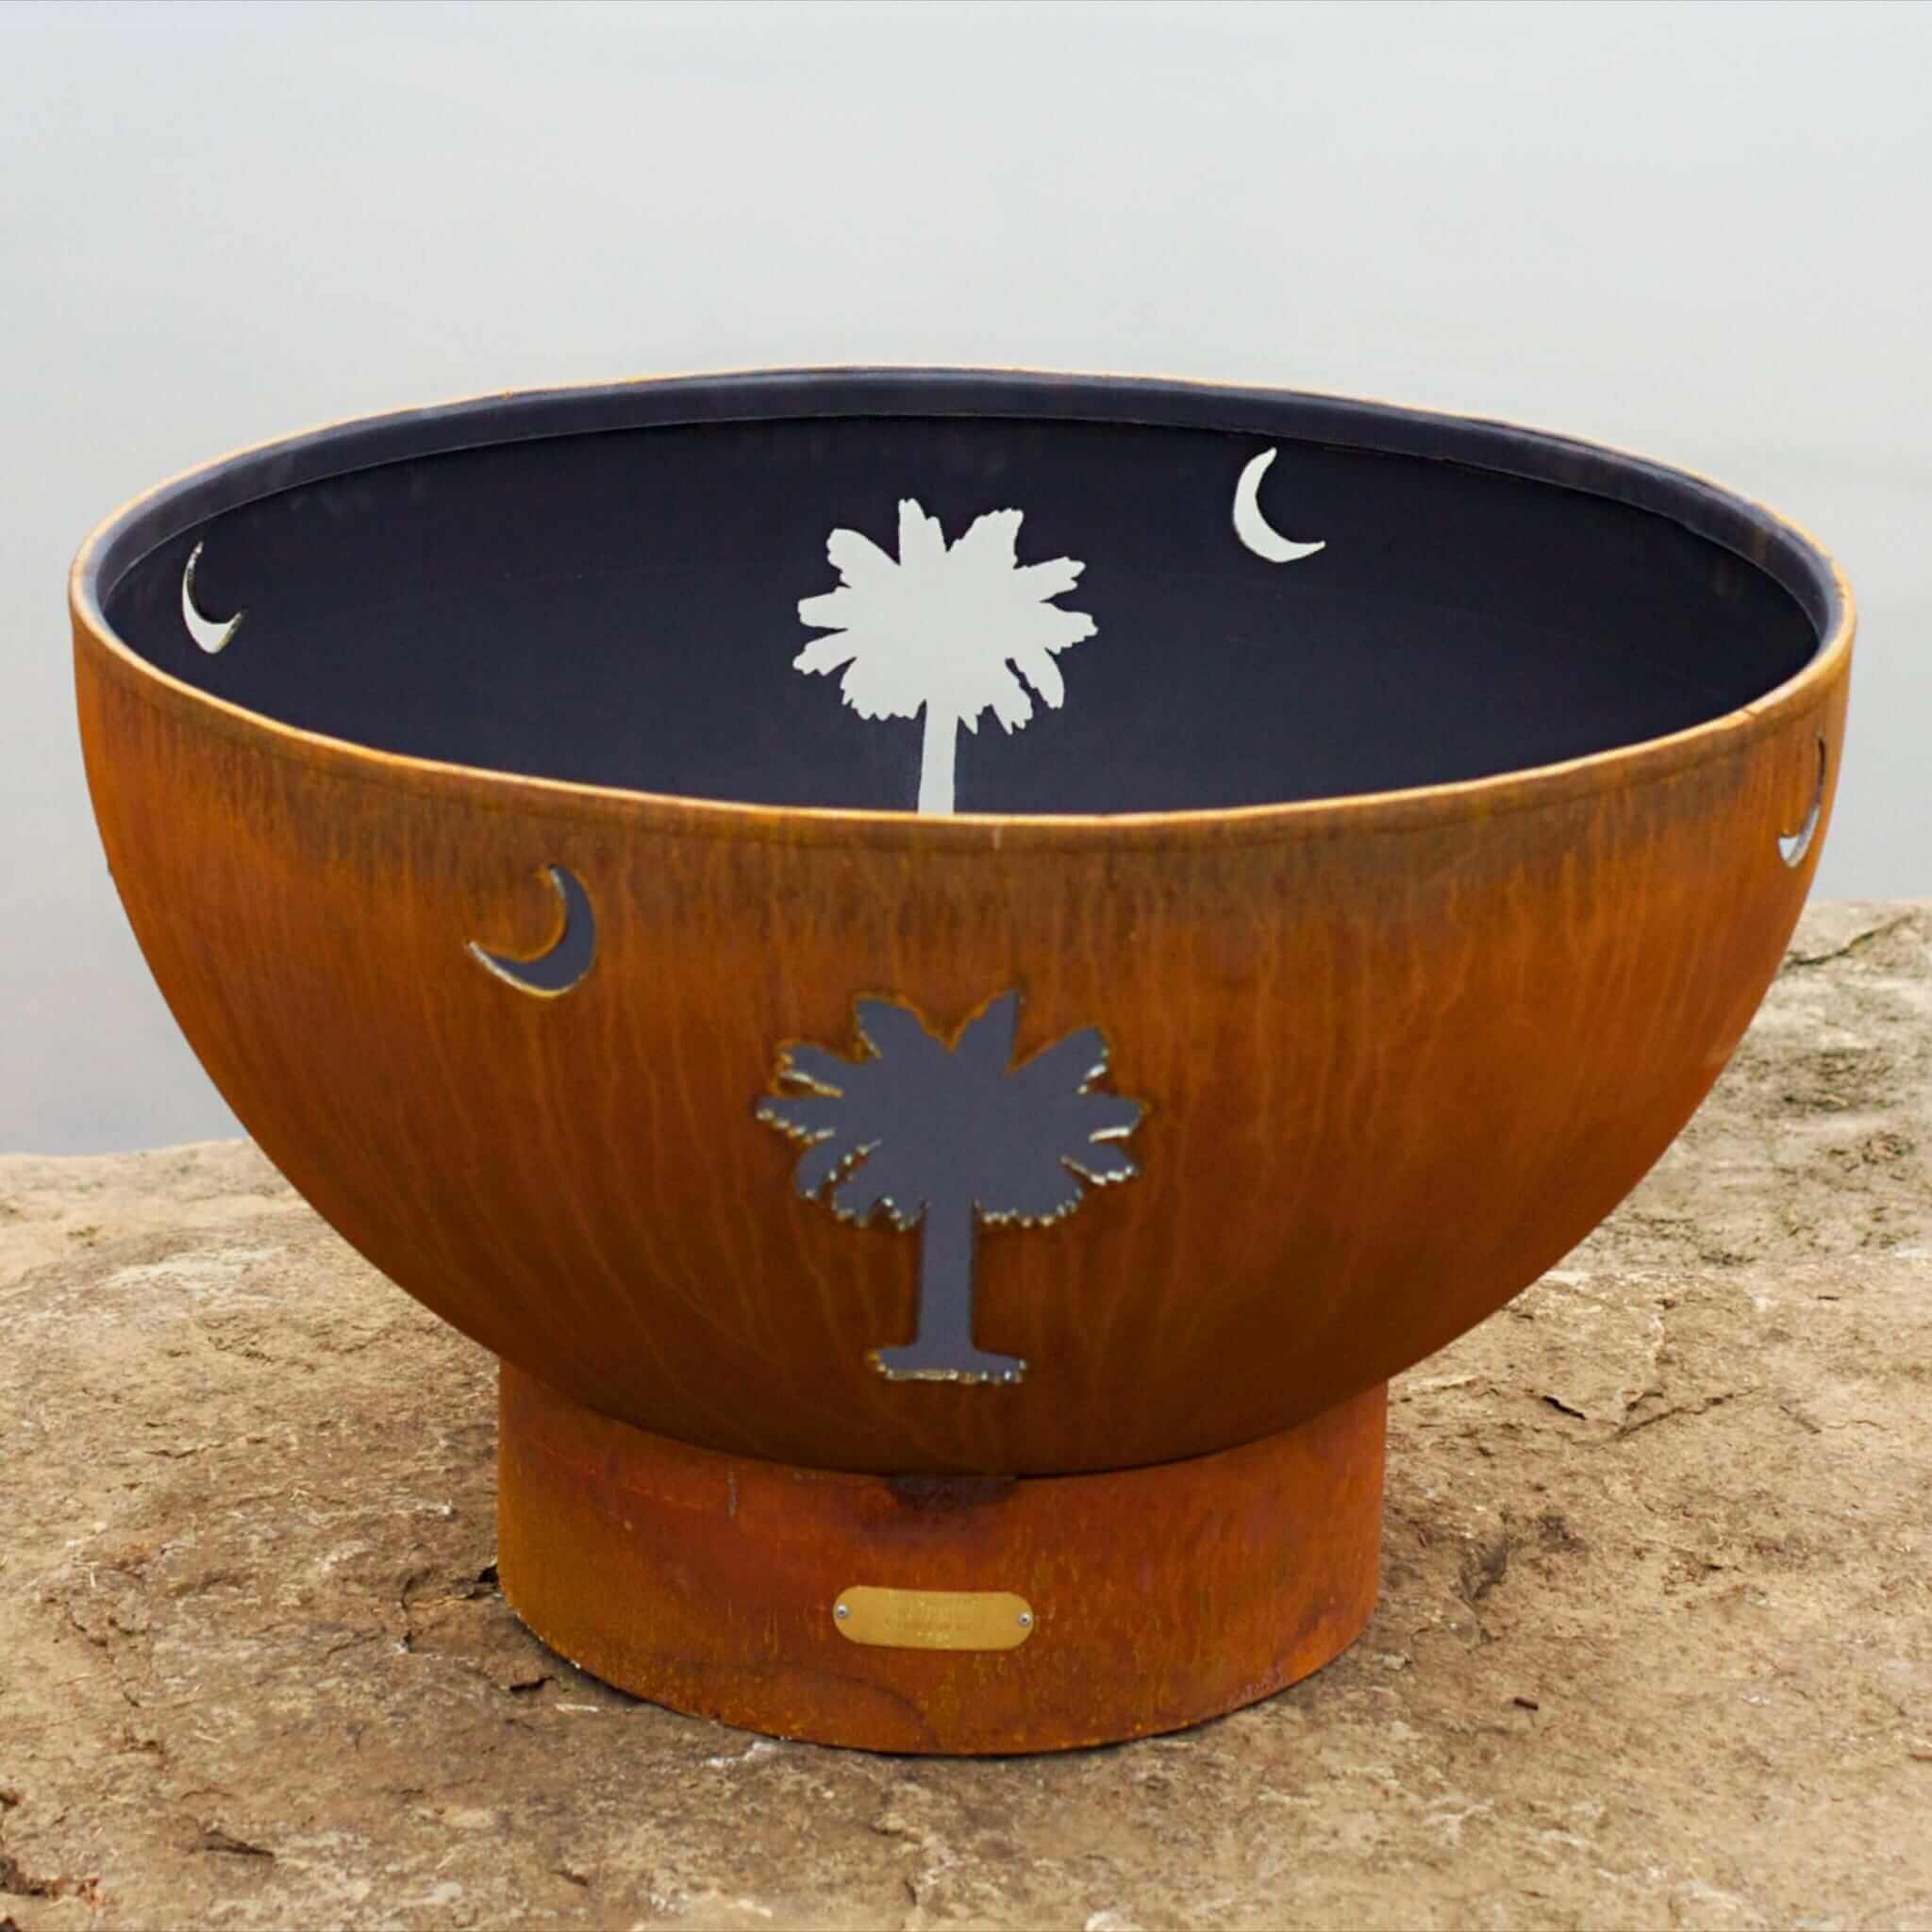 "Tropical Moon" Wood Burning Fire Pit in Steel - Fire Pit Art